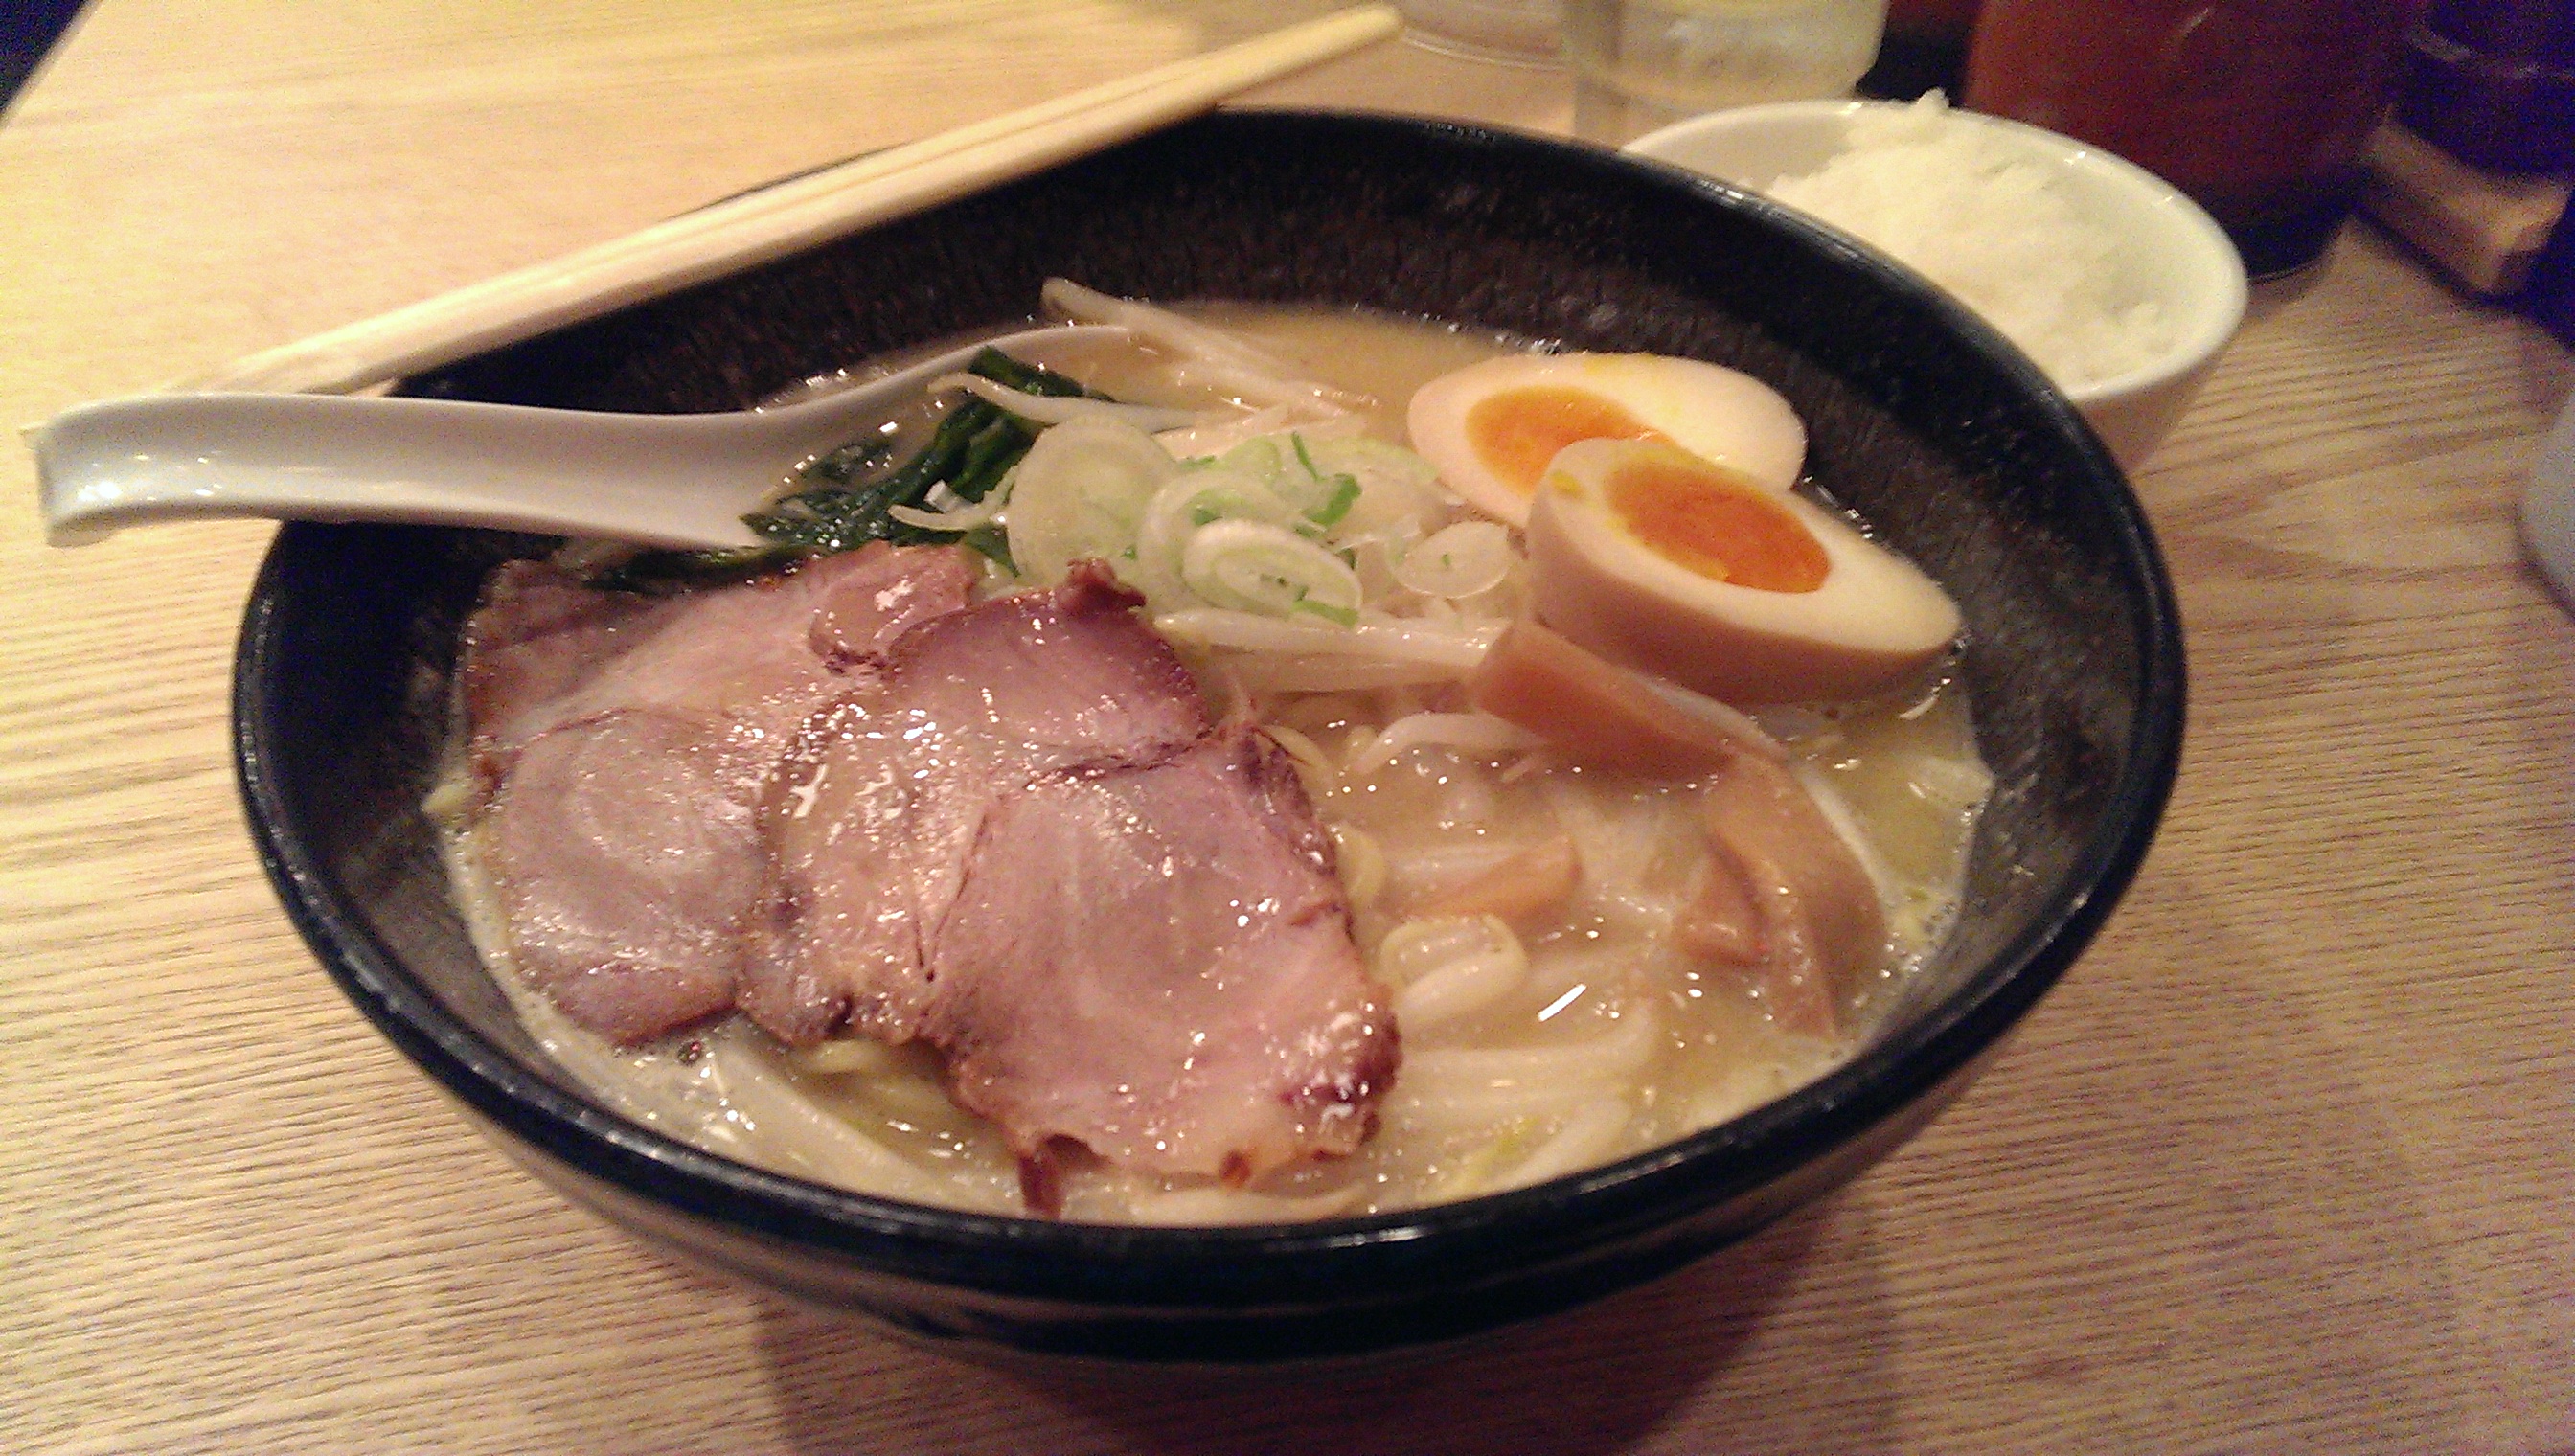 Hokkaido style ramen. My friend had this one, I had one without the eggs on top. I was delicious.